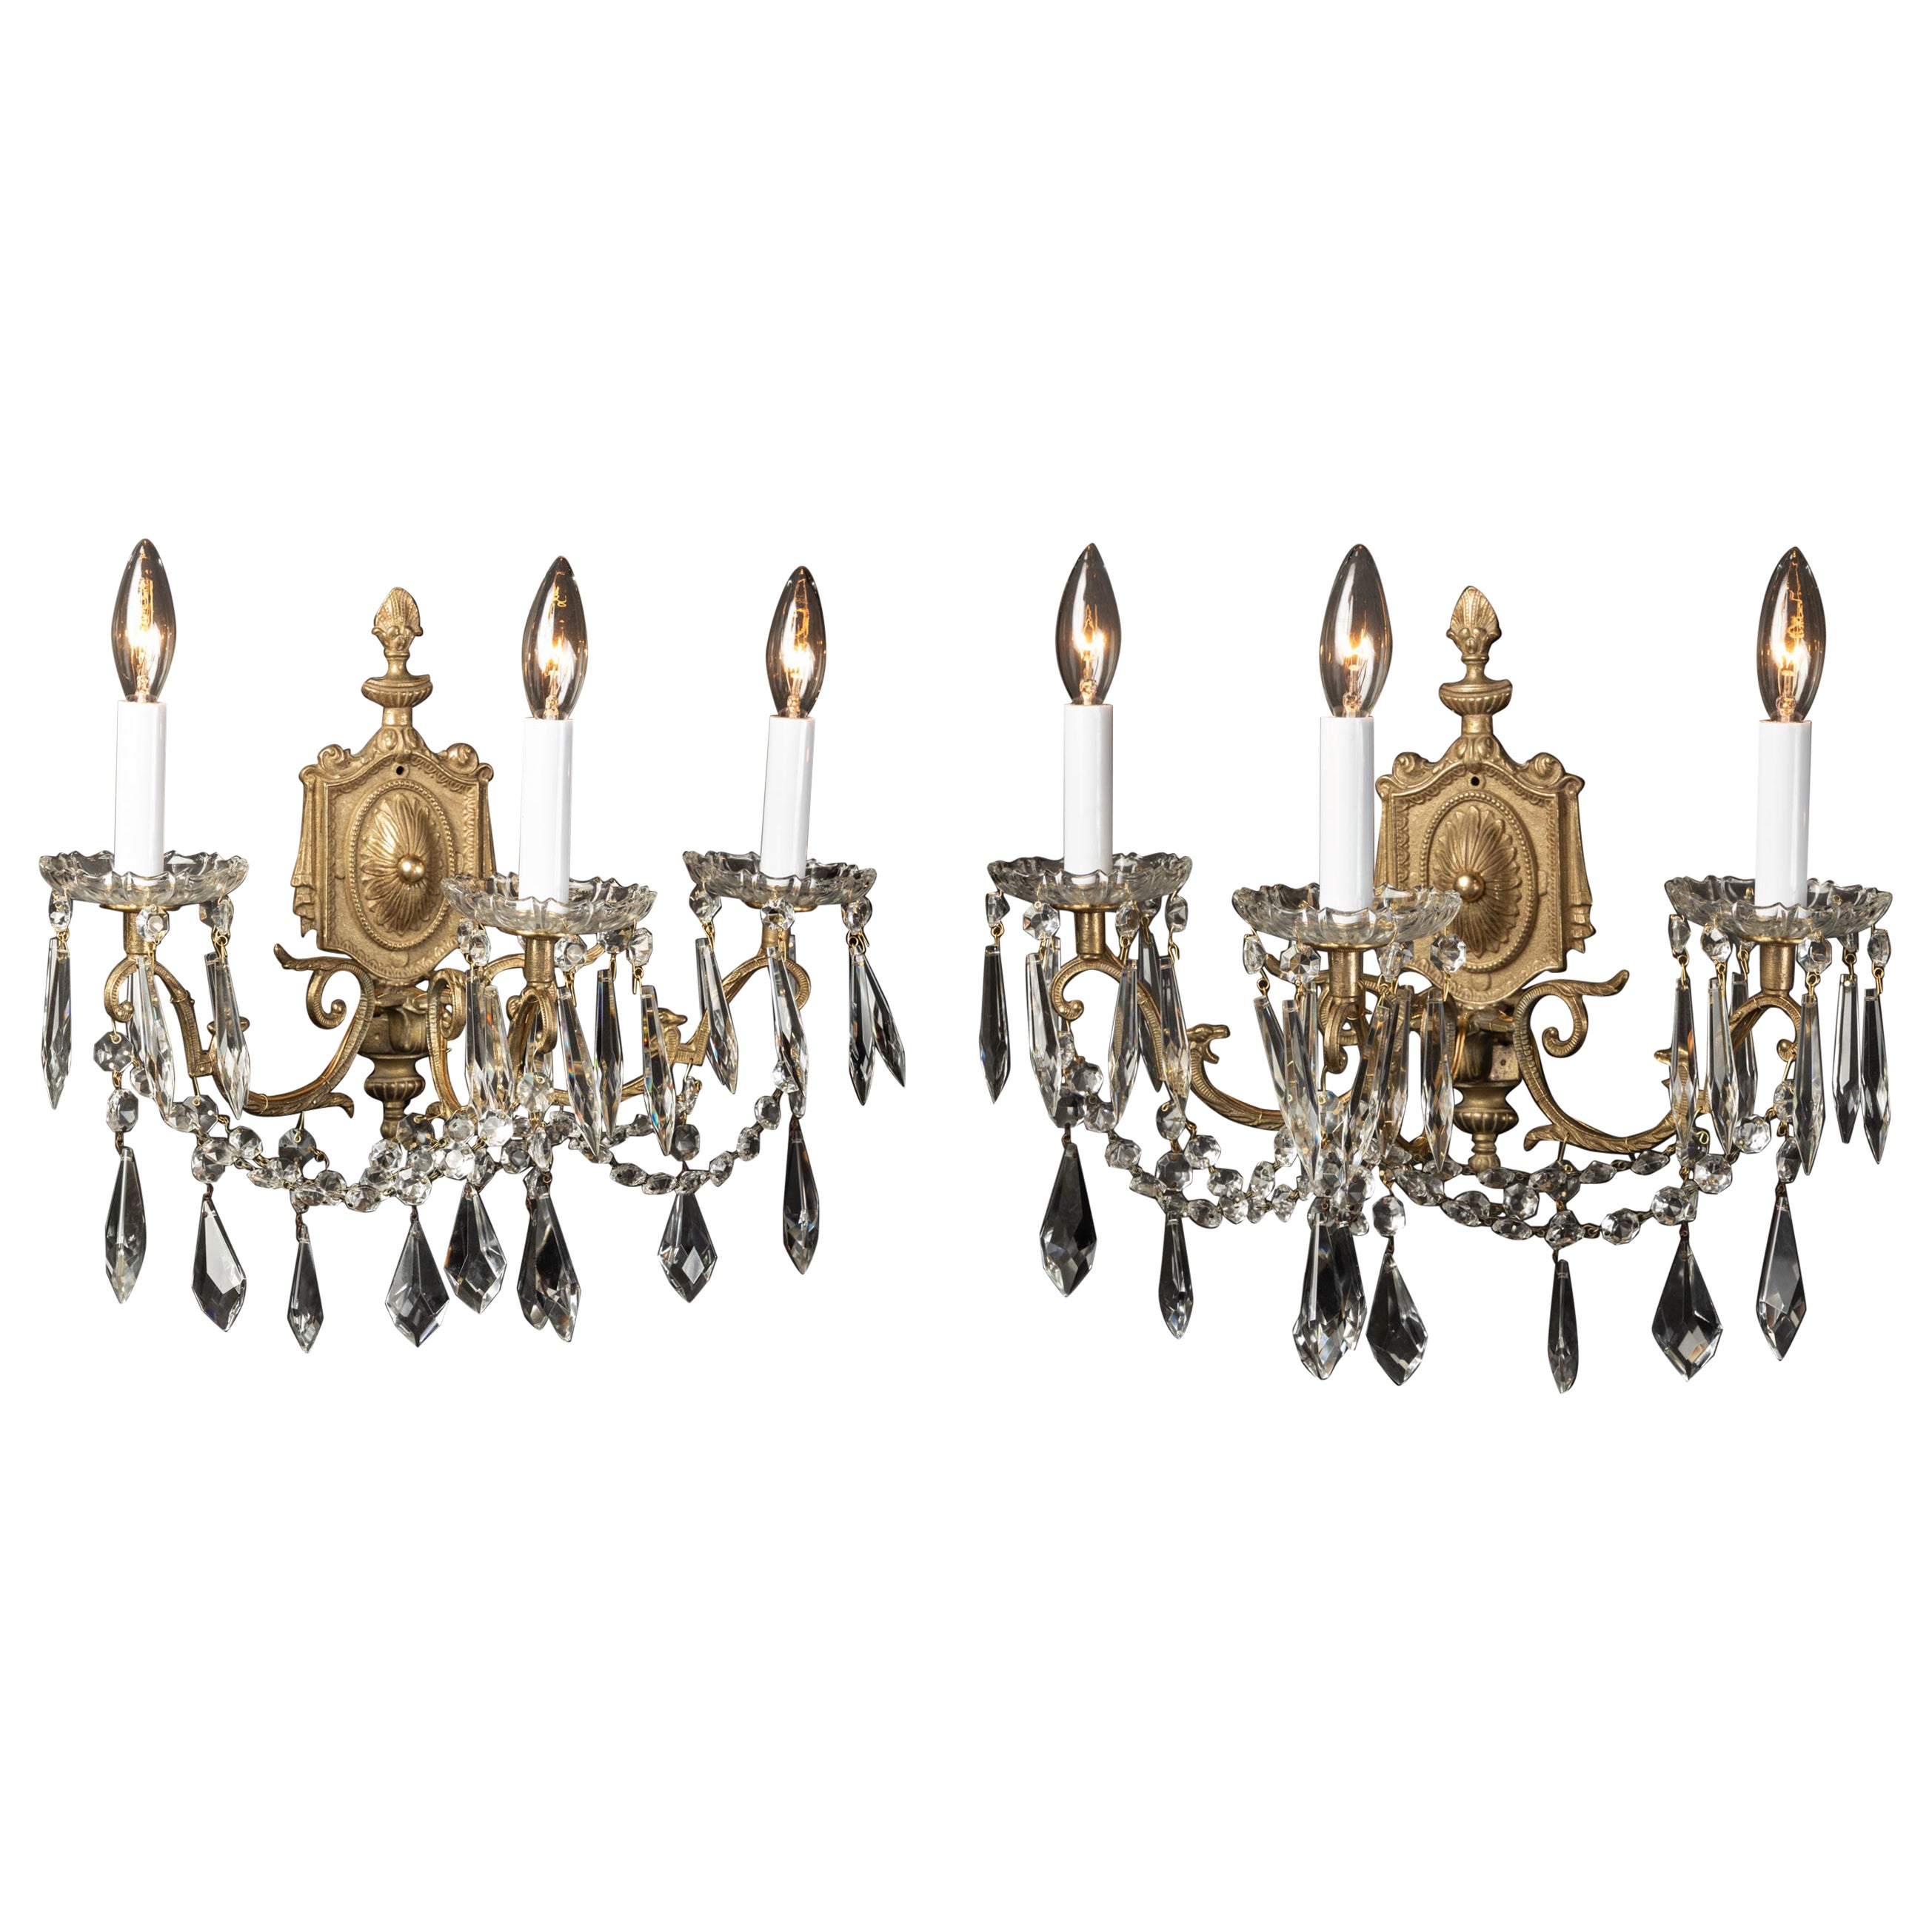  Pair of French Late 19th Century Louis XVI Bronze and Crystal Sconces  For Sale